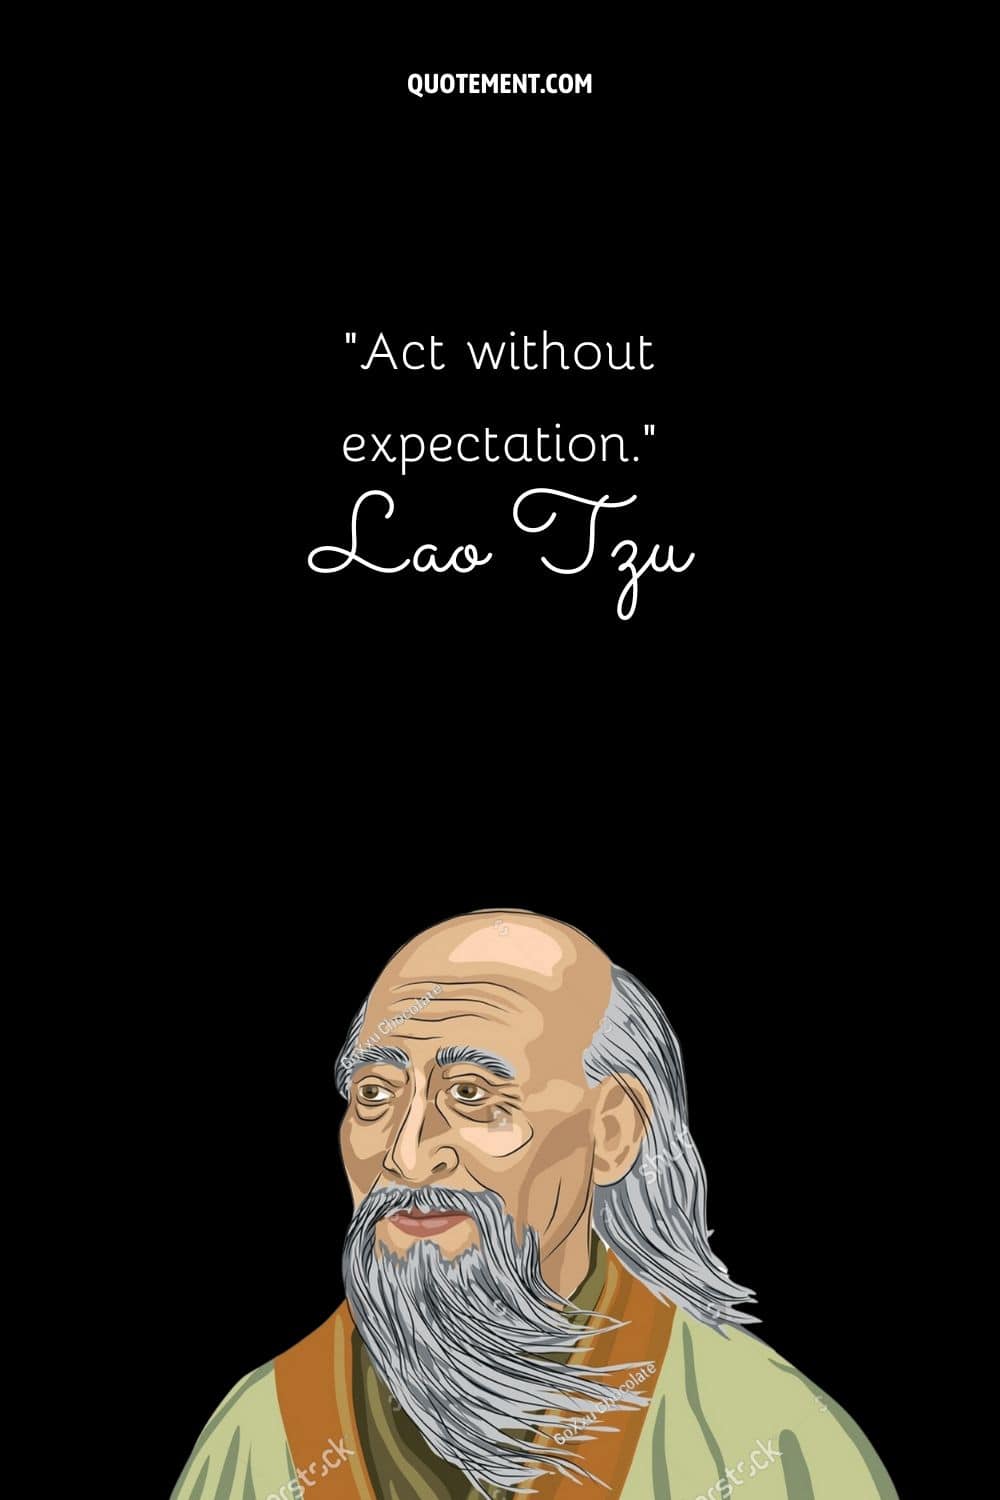 Act without expectation